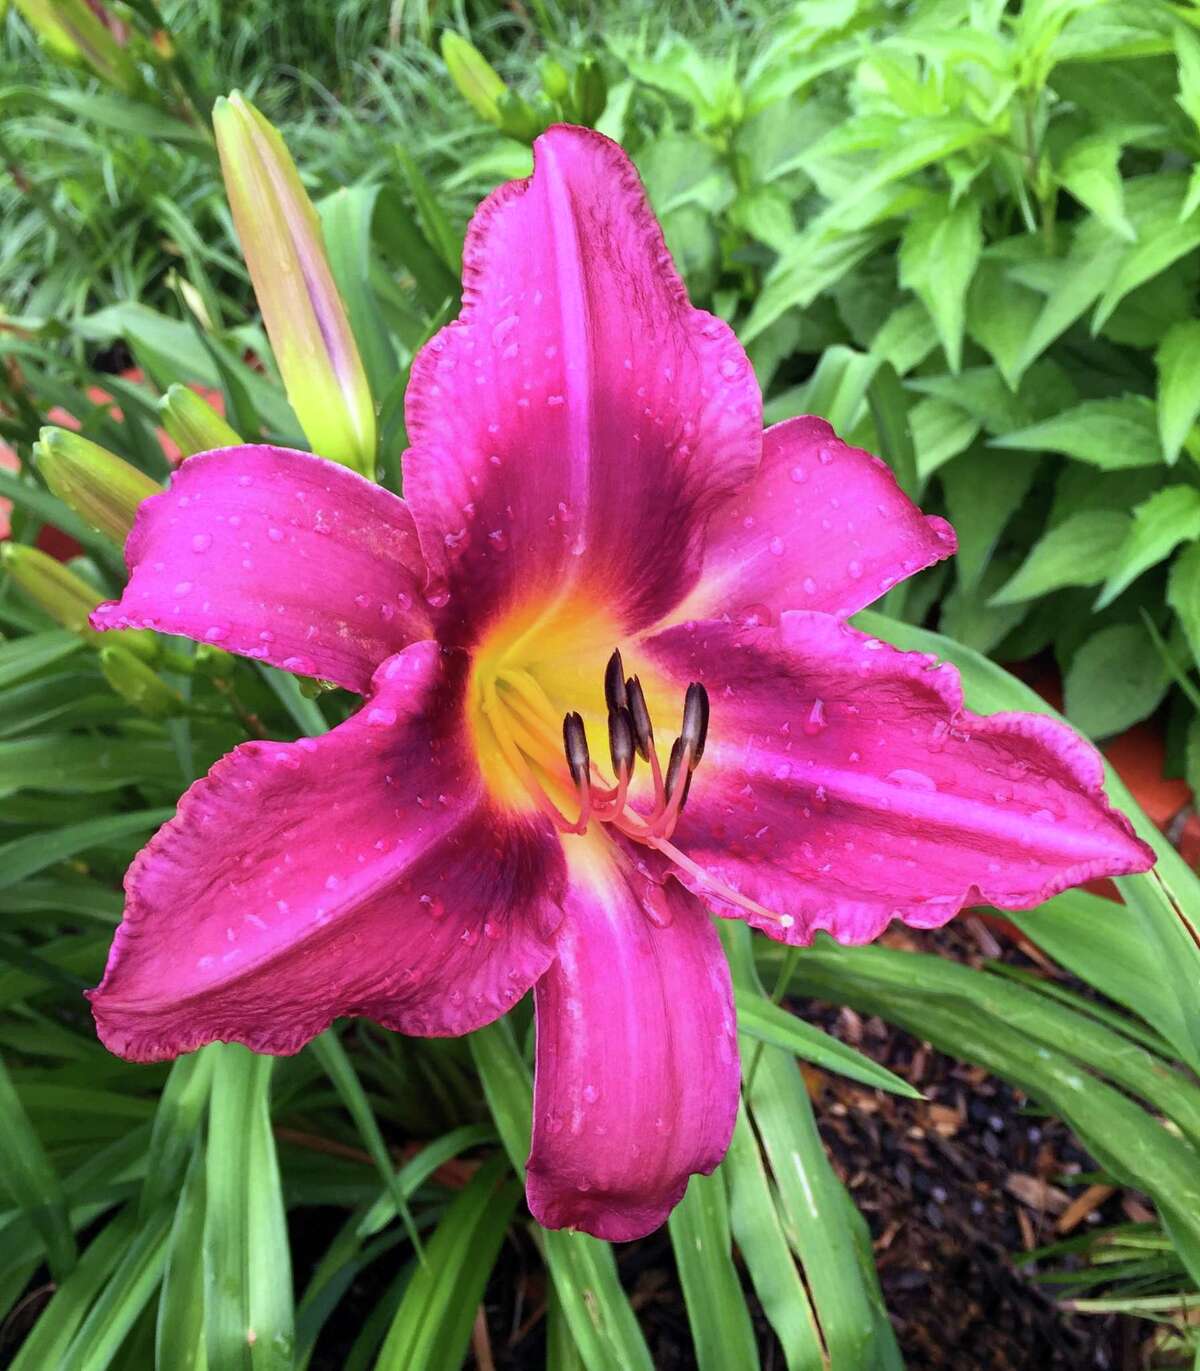 Late September and early October are the best times to separate overcrowded daylilies, but late winter is also a good time, before they really start growing.